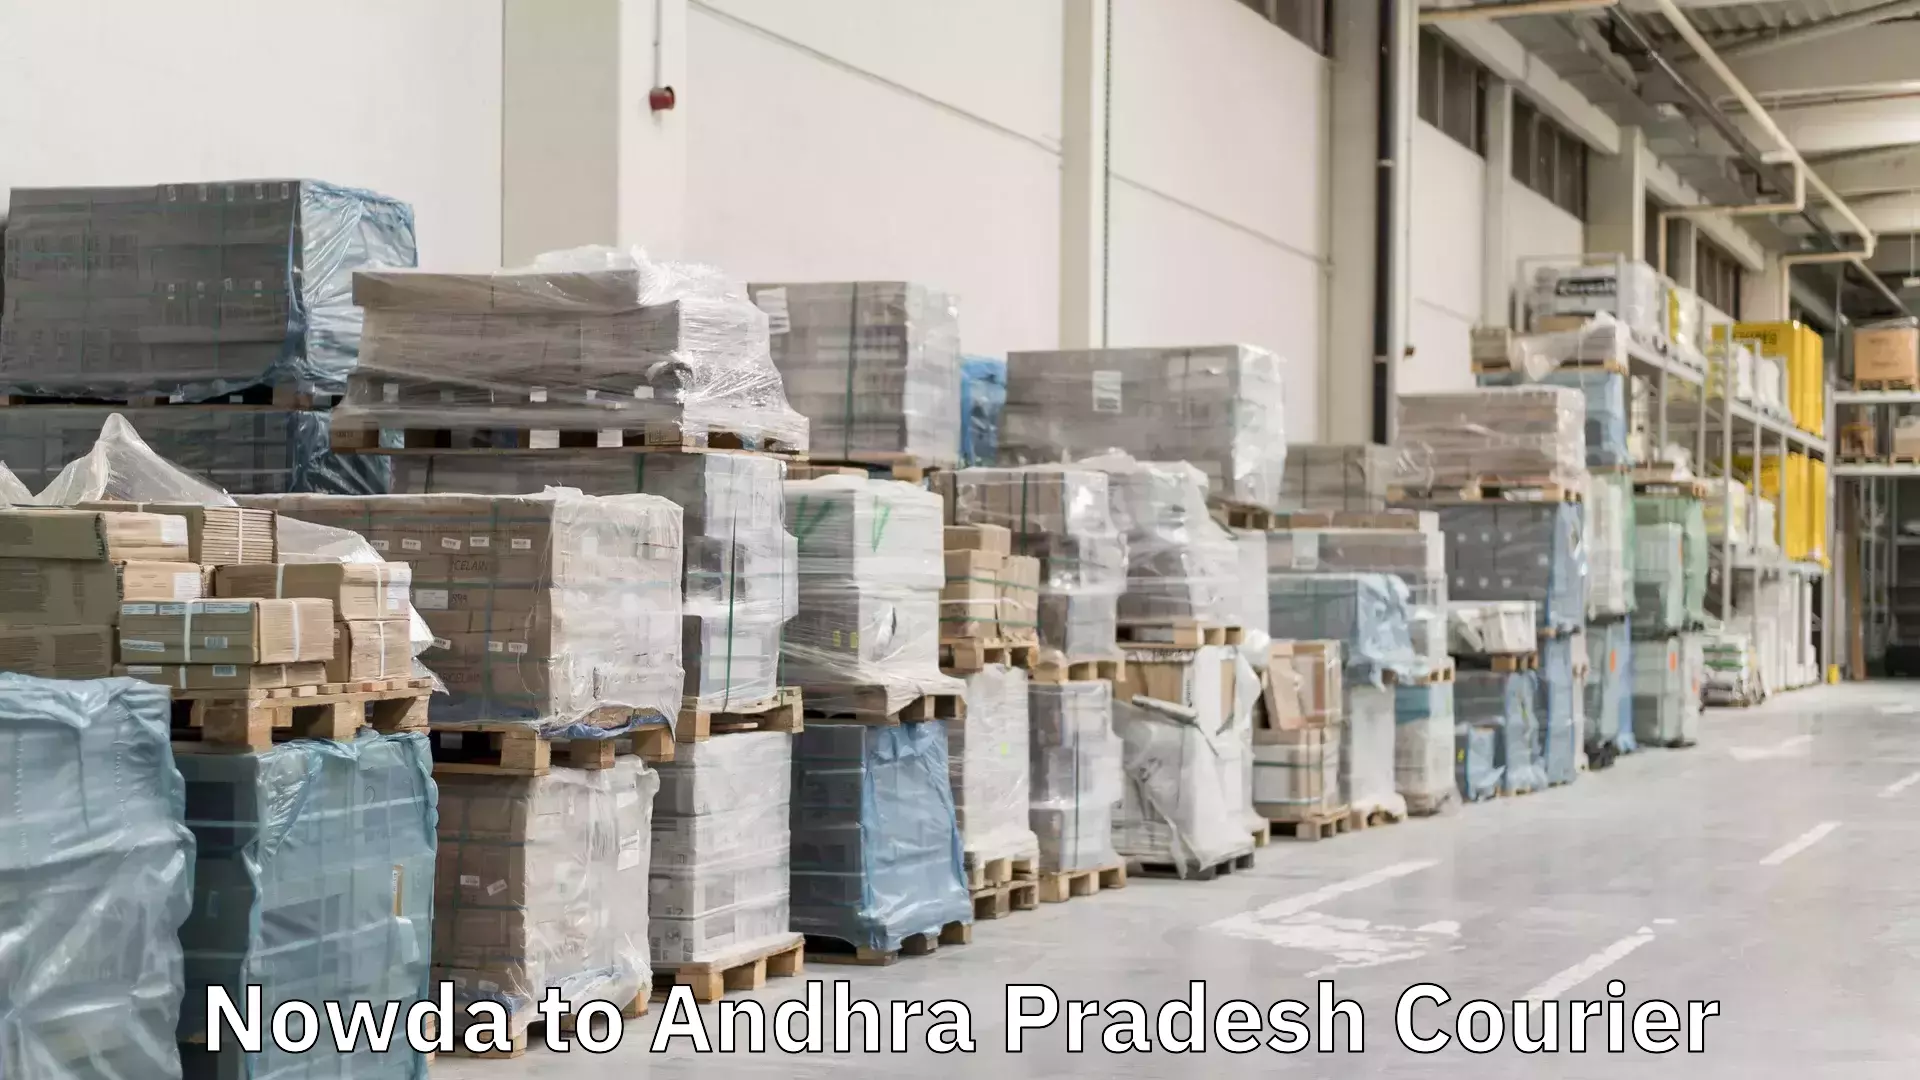 Express mail solutions Nowda to Andhra Pradesh